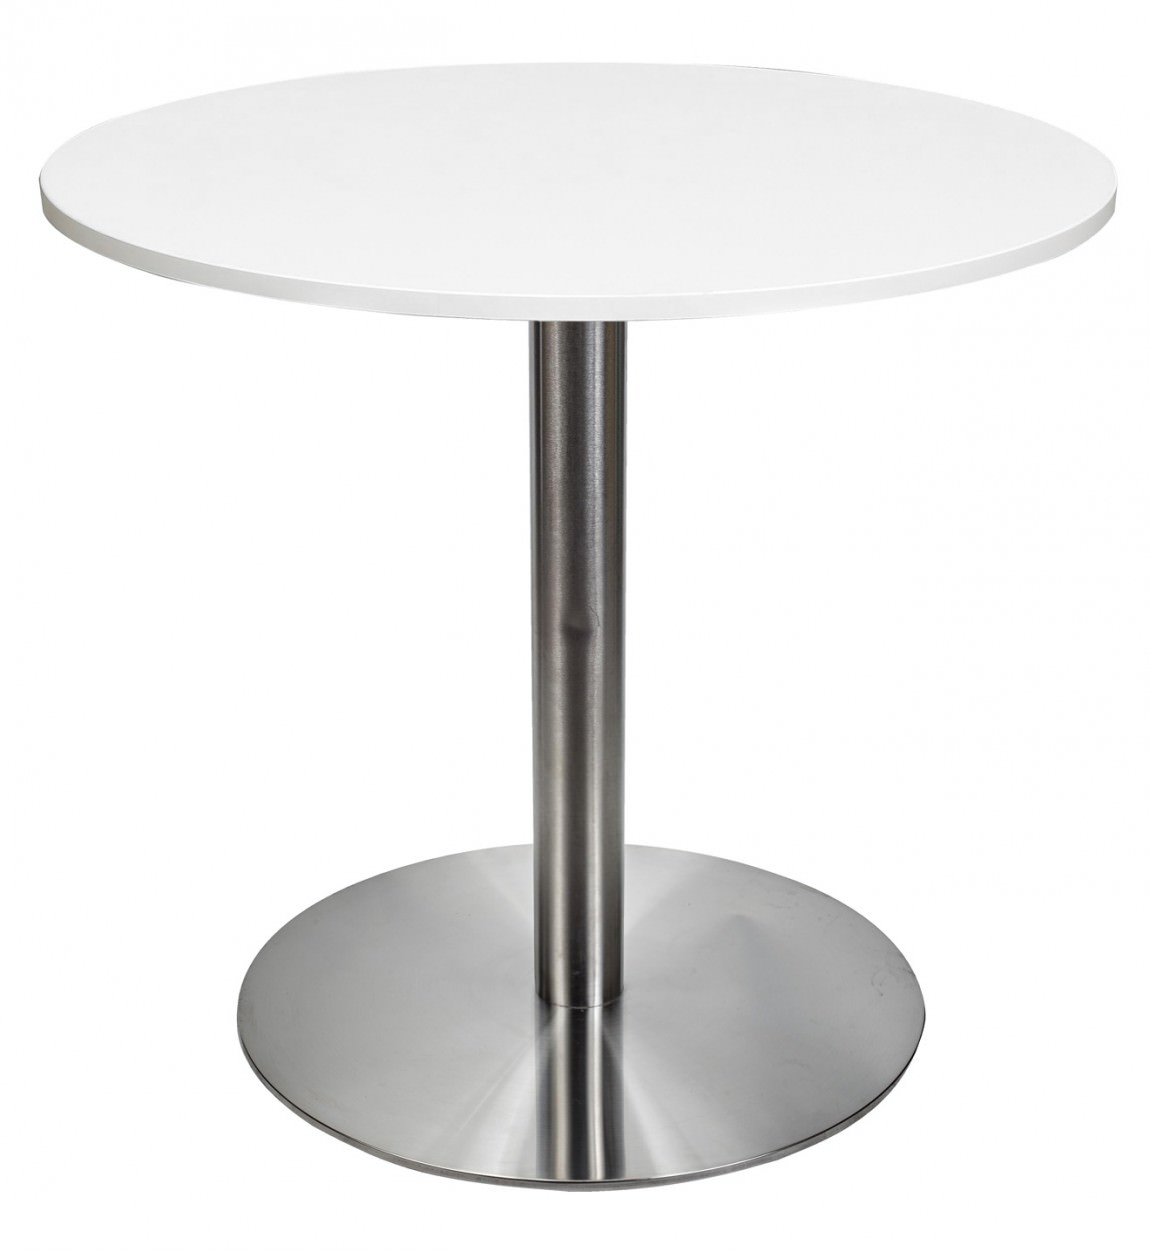 White Cafe Table with Metal Base